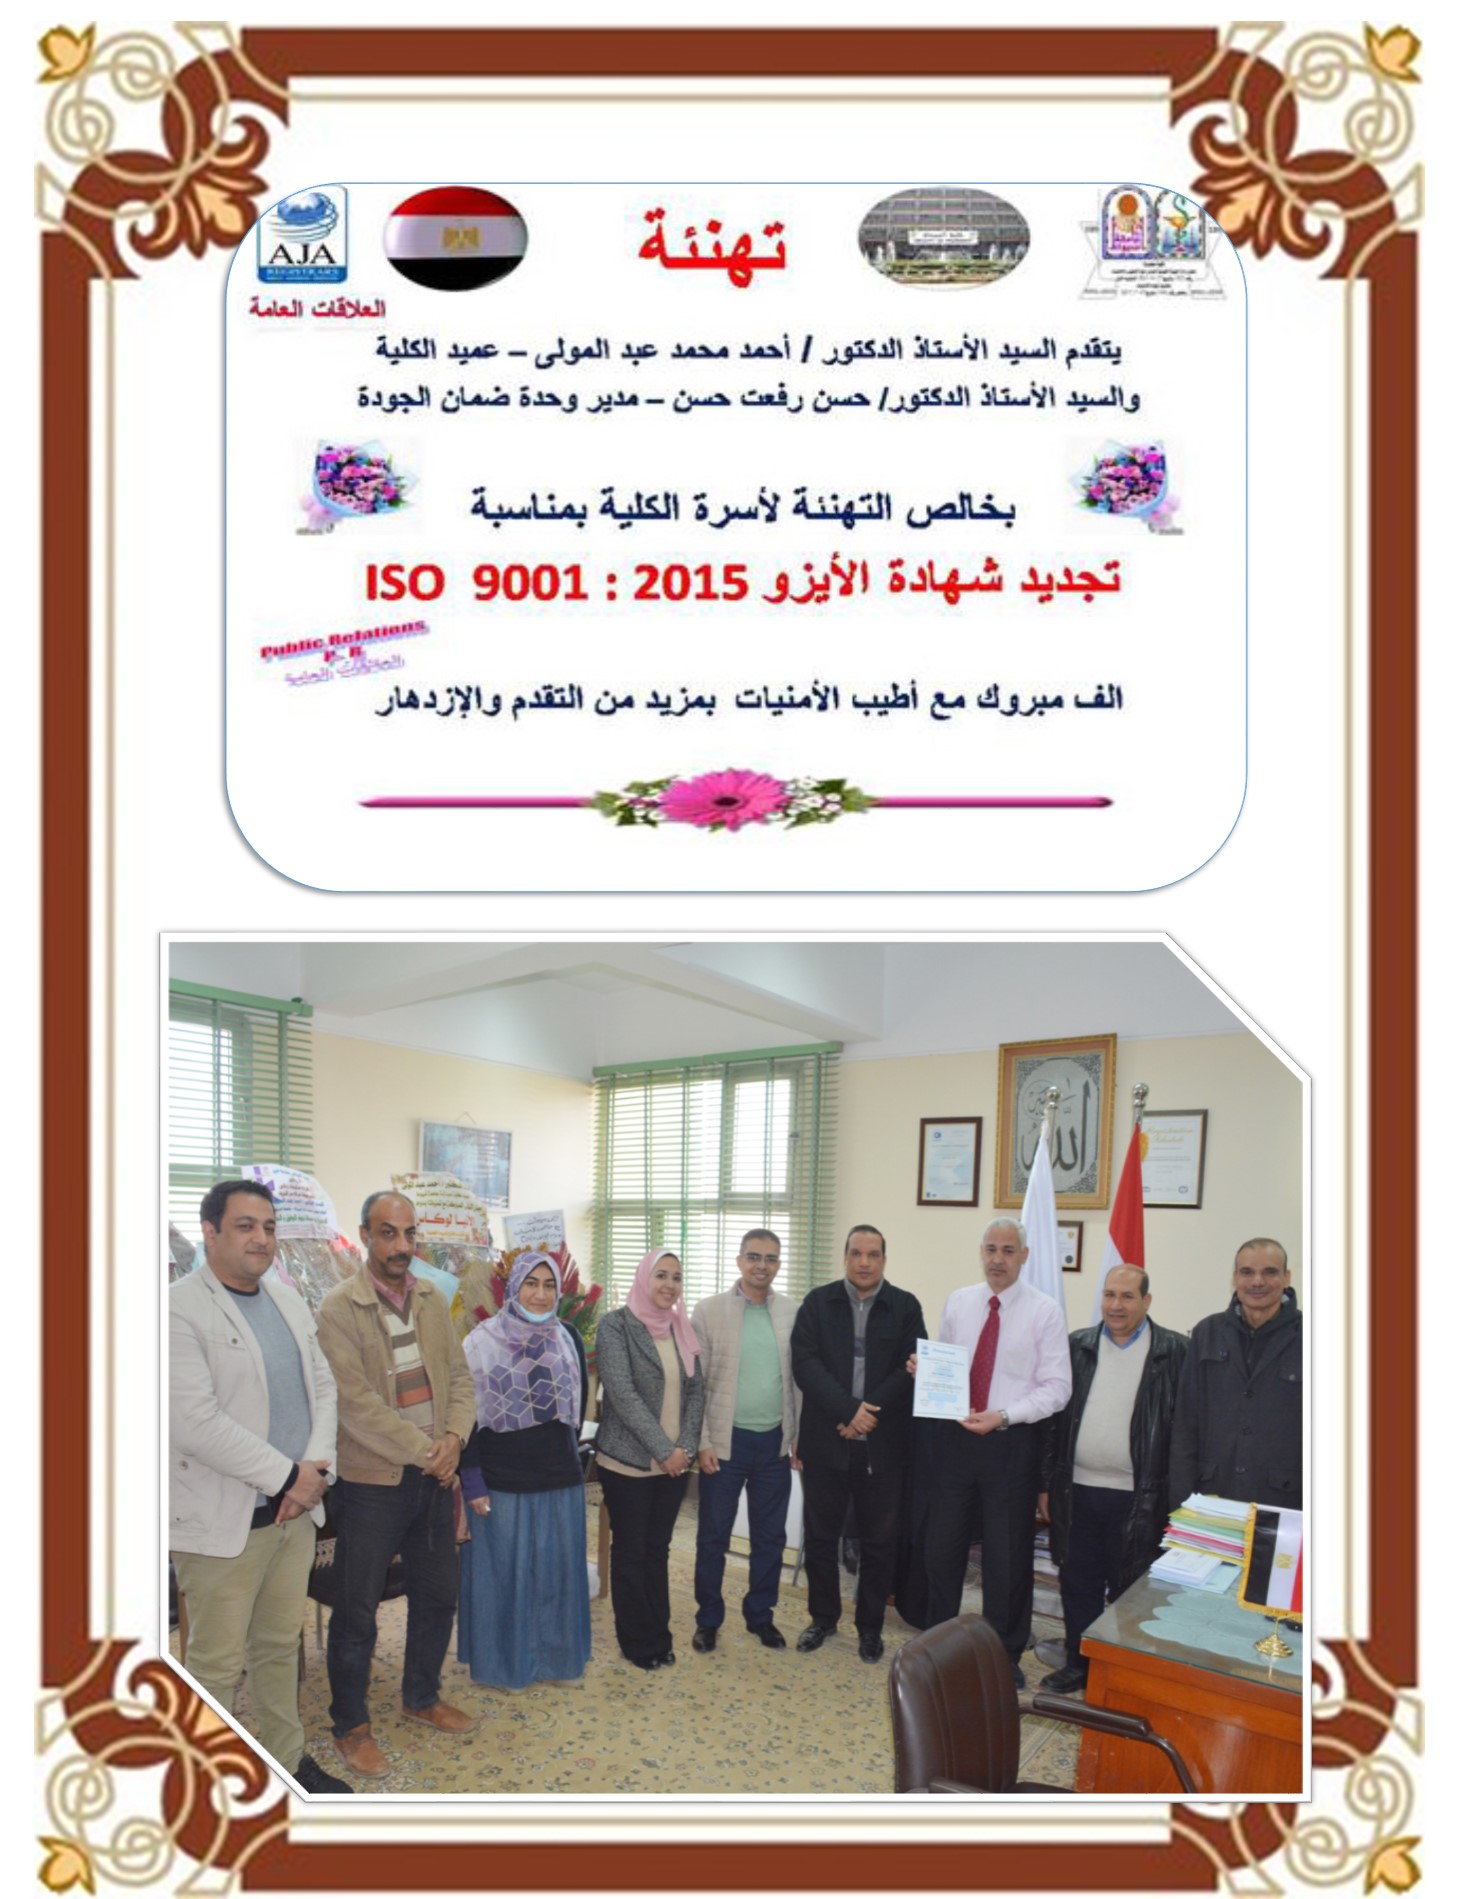 Prof. Dr. Ahmed Mohamed Abdel Mawla - Dean of the Faculty , Prof. Dr. Hassan Refaat Hassan - Director of the Quality Assurance Unit congratulate  the Faculty family  for the Renewal of certification  ISO  9001 : 2015 